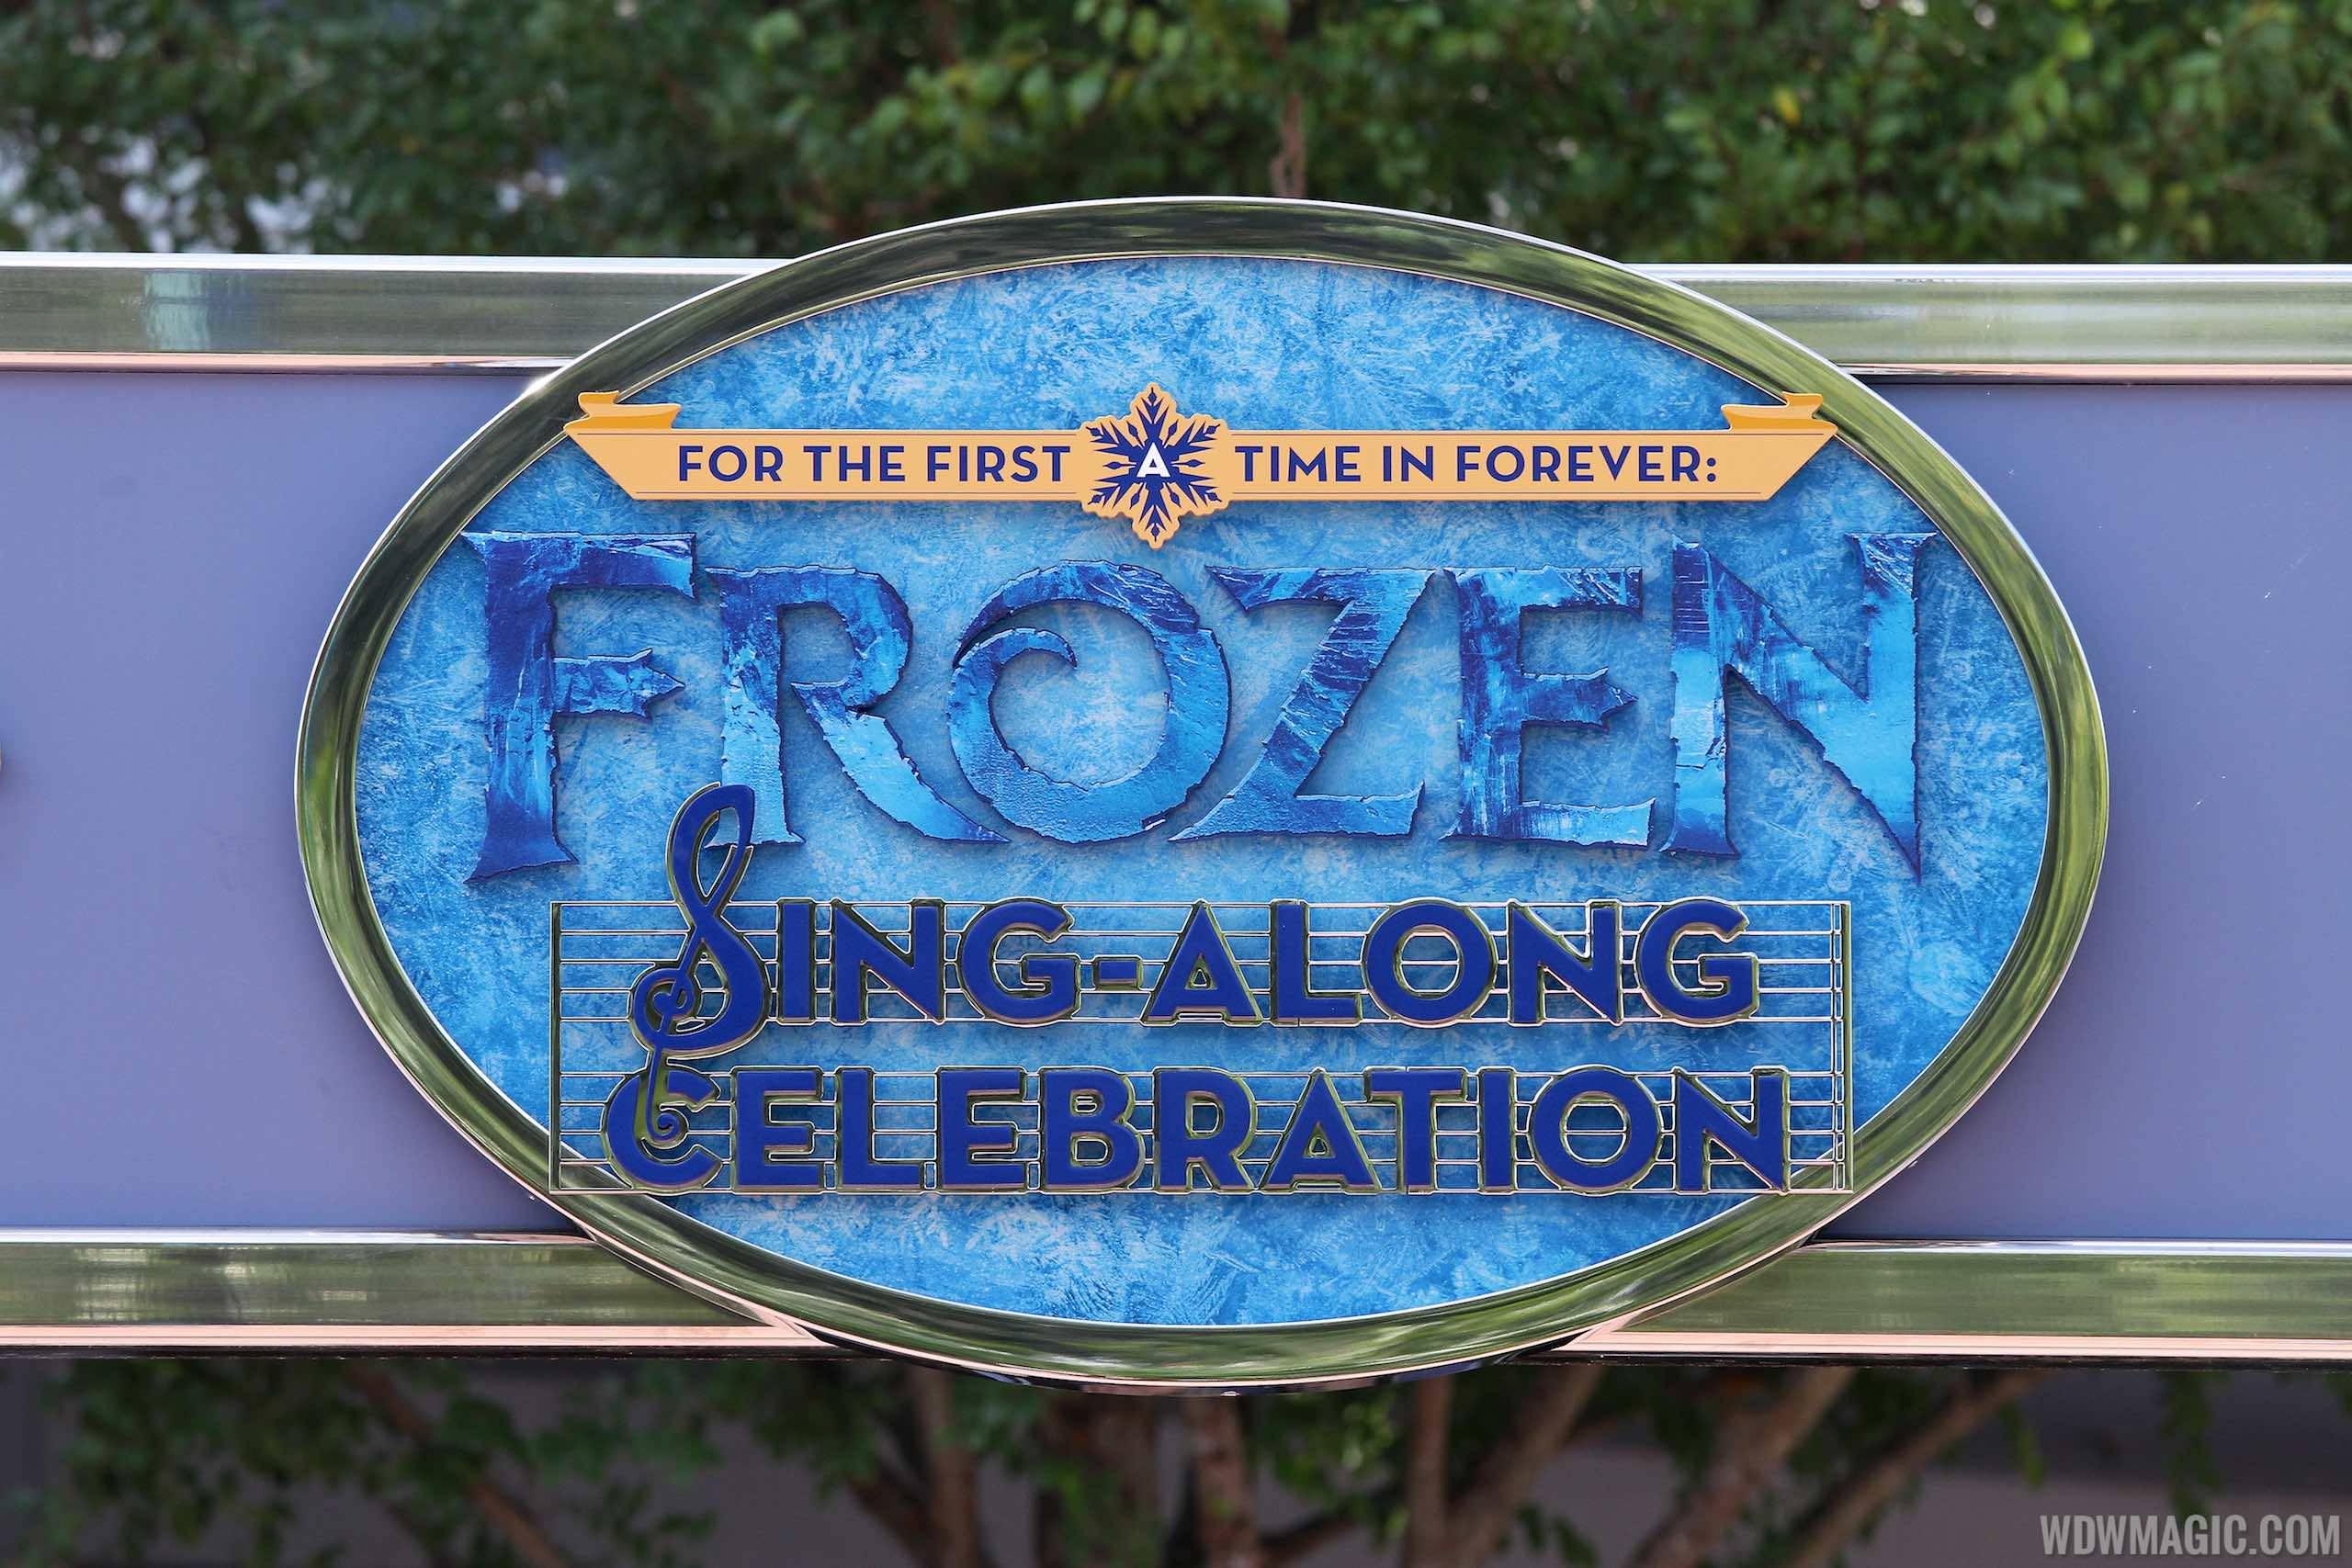 VIDEO - See the Frozen Fireworks spectacular from multiple angles throughout the park